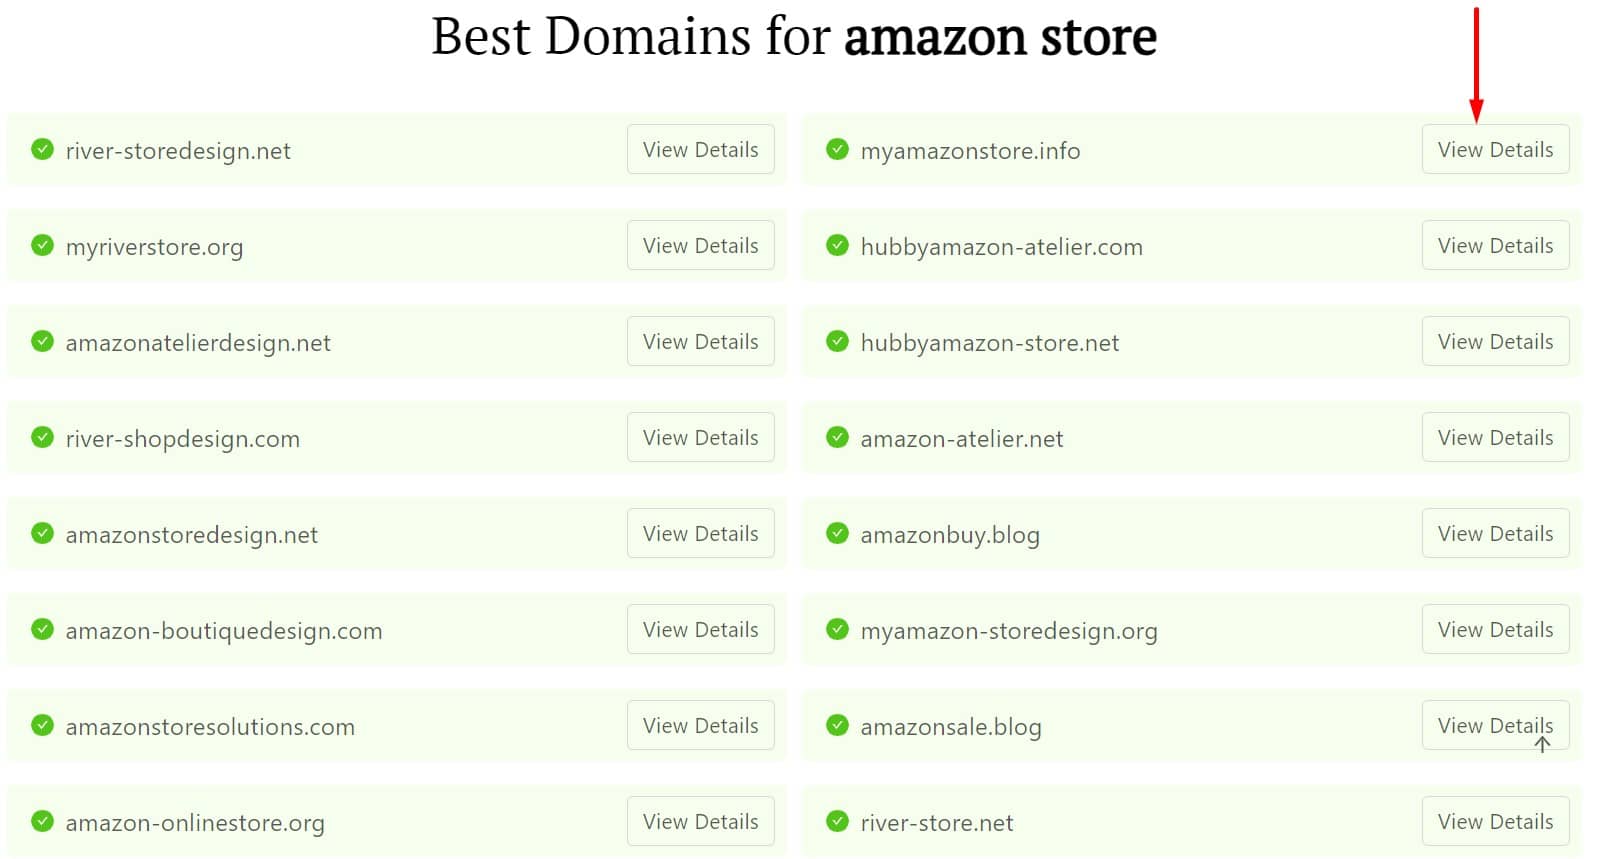 DomainWheel domain name generator search results with a red arrow pointing to the "View Details" in the top right search result